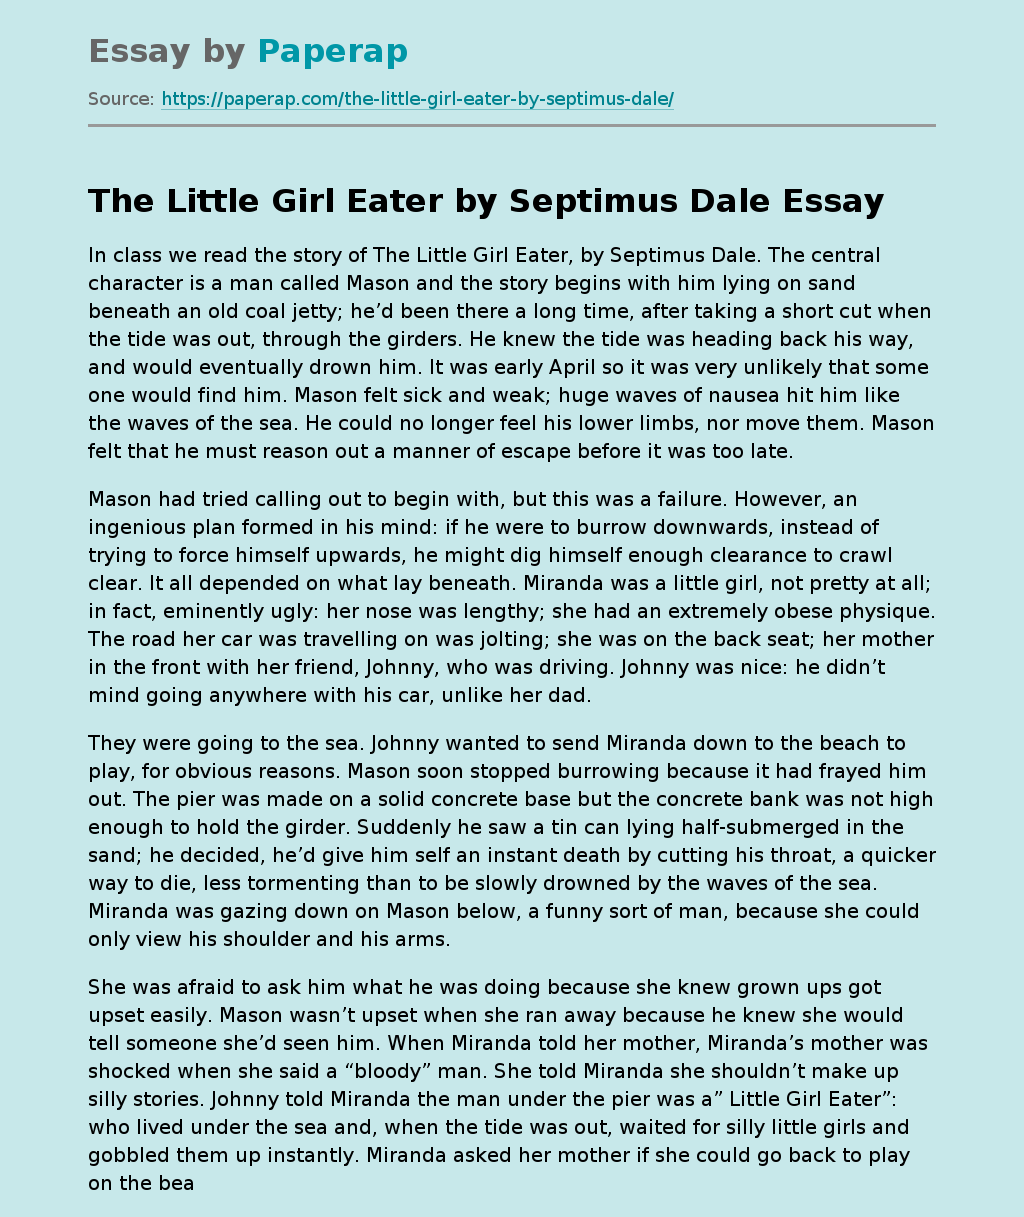 The Little Girl Eater by Septimus Dale